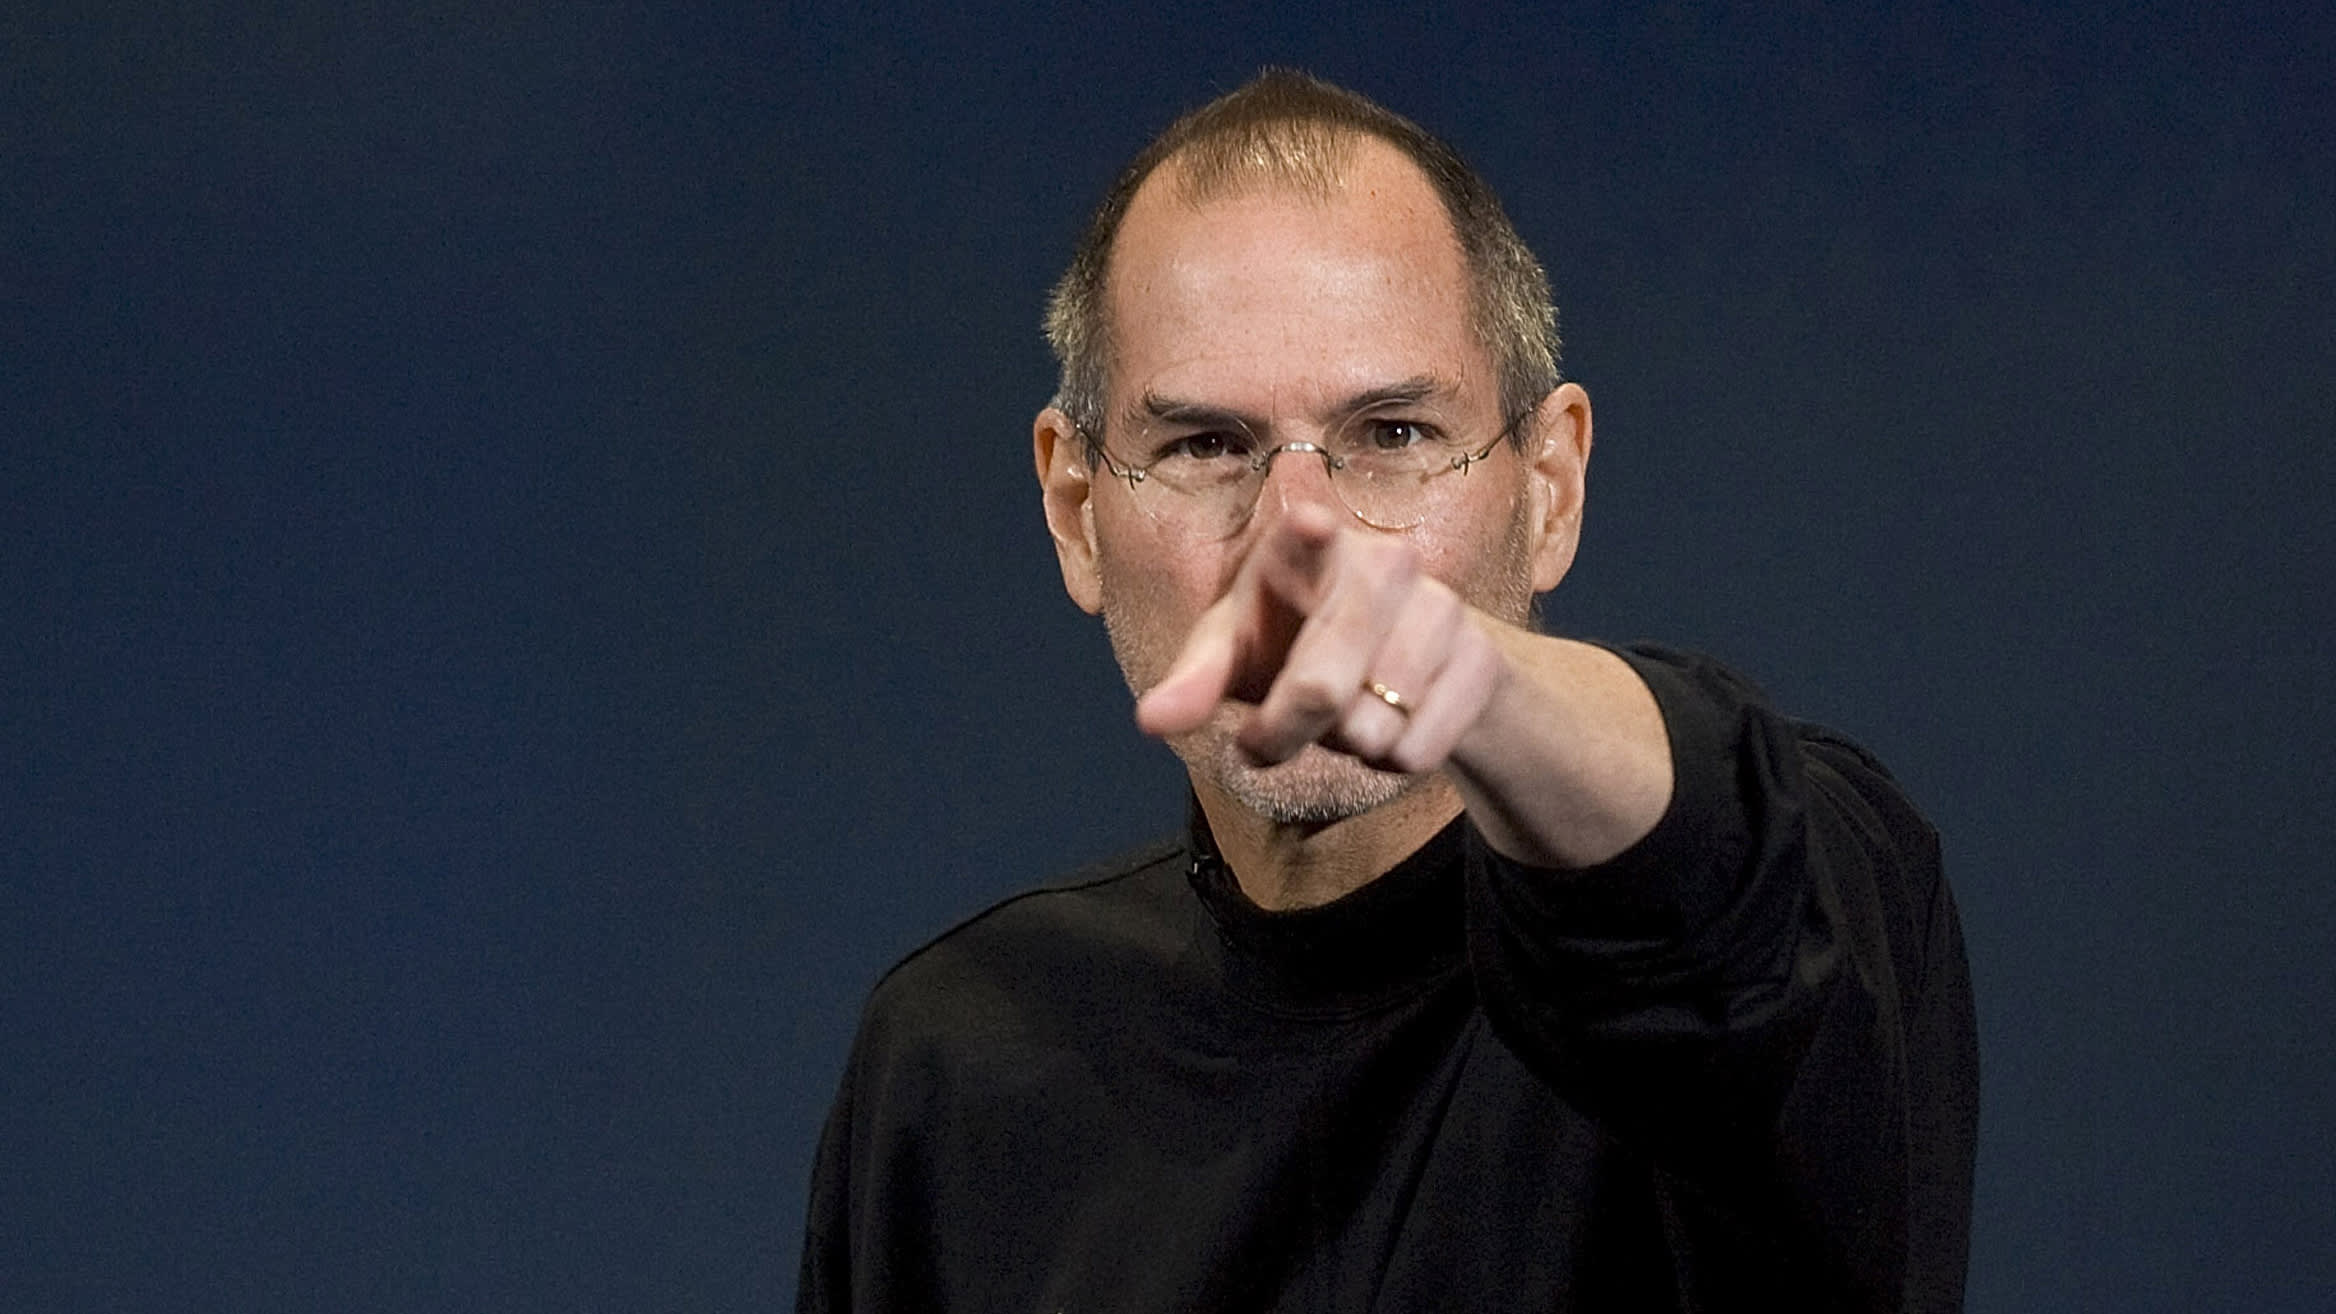 Steve Jobs Opens Up About Family and Regrets in His Last Days: A Personal Side of Apple's Visionary